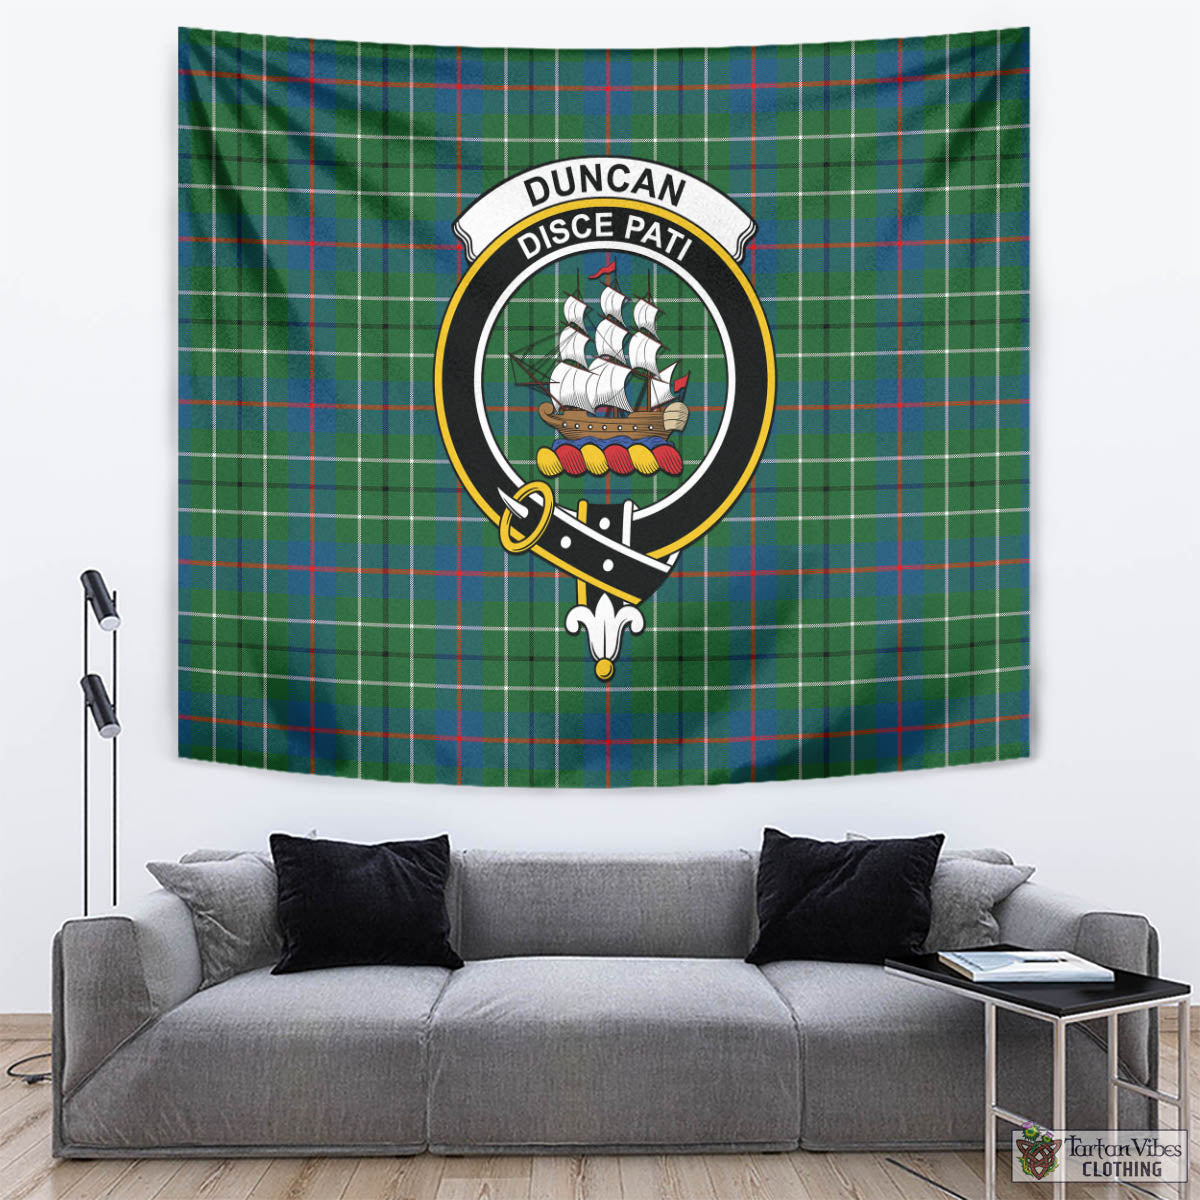 Tartan Vibes Clothing Duncan Ancient Tartan Tapestry Wall Hanging and Home Decor for Room with Family Crest